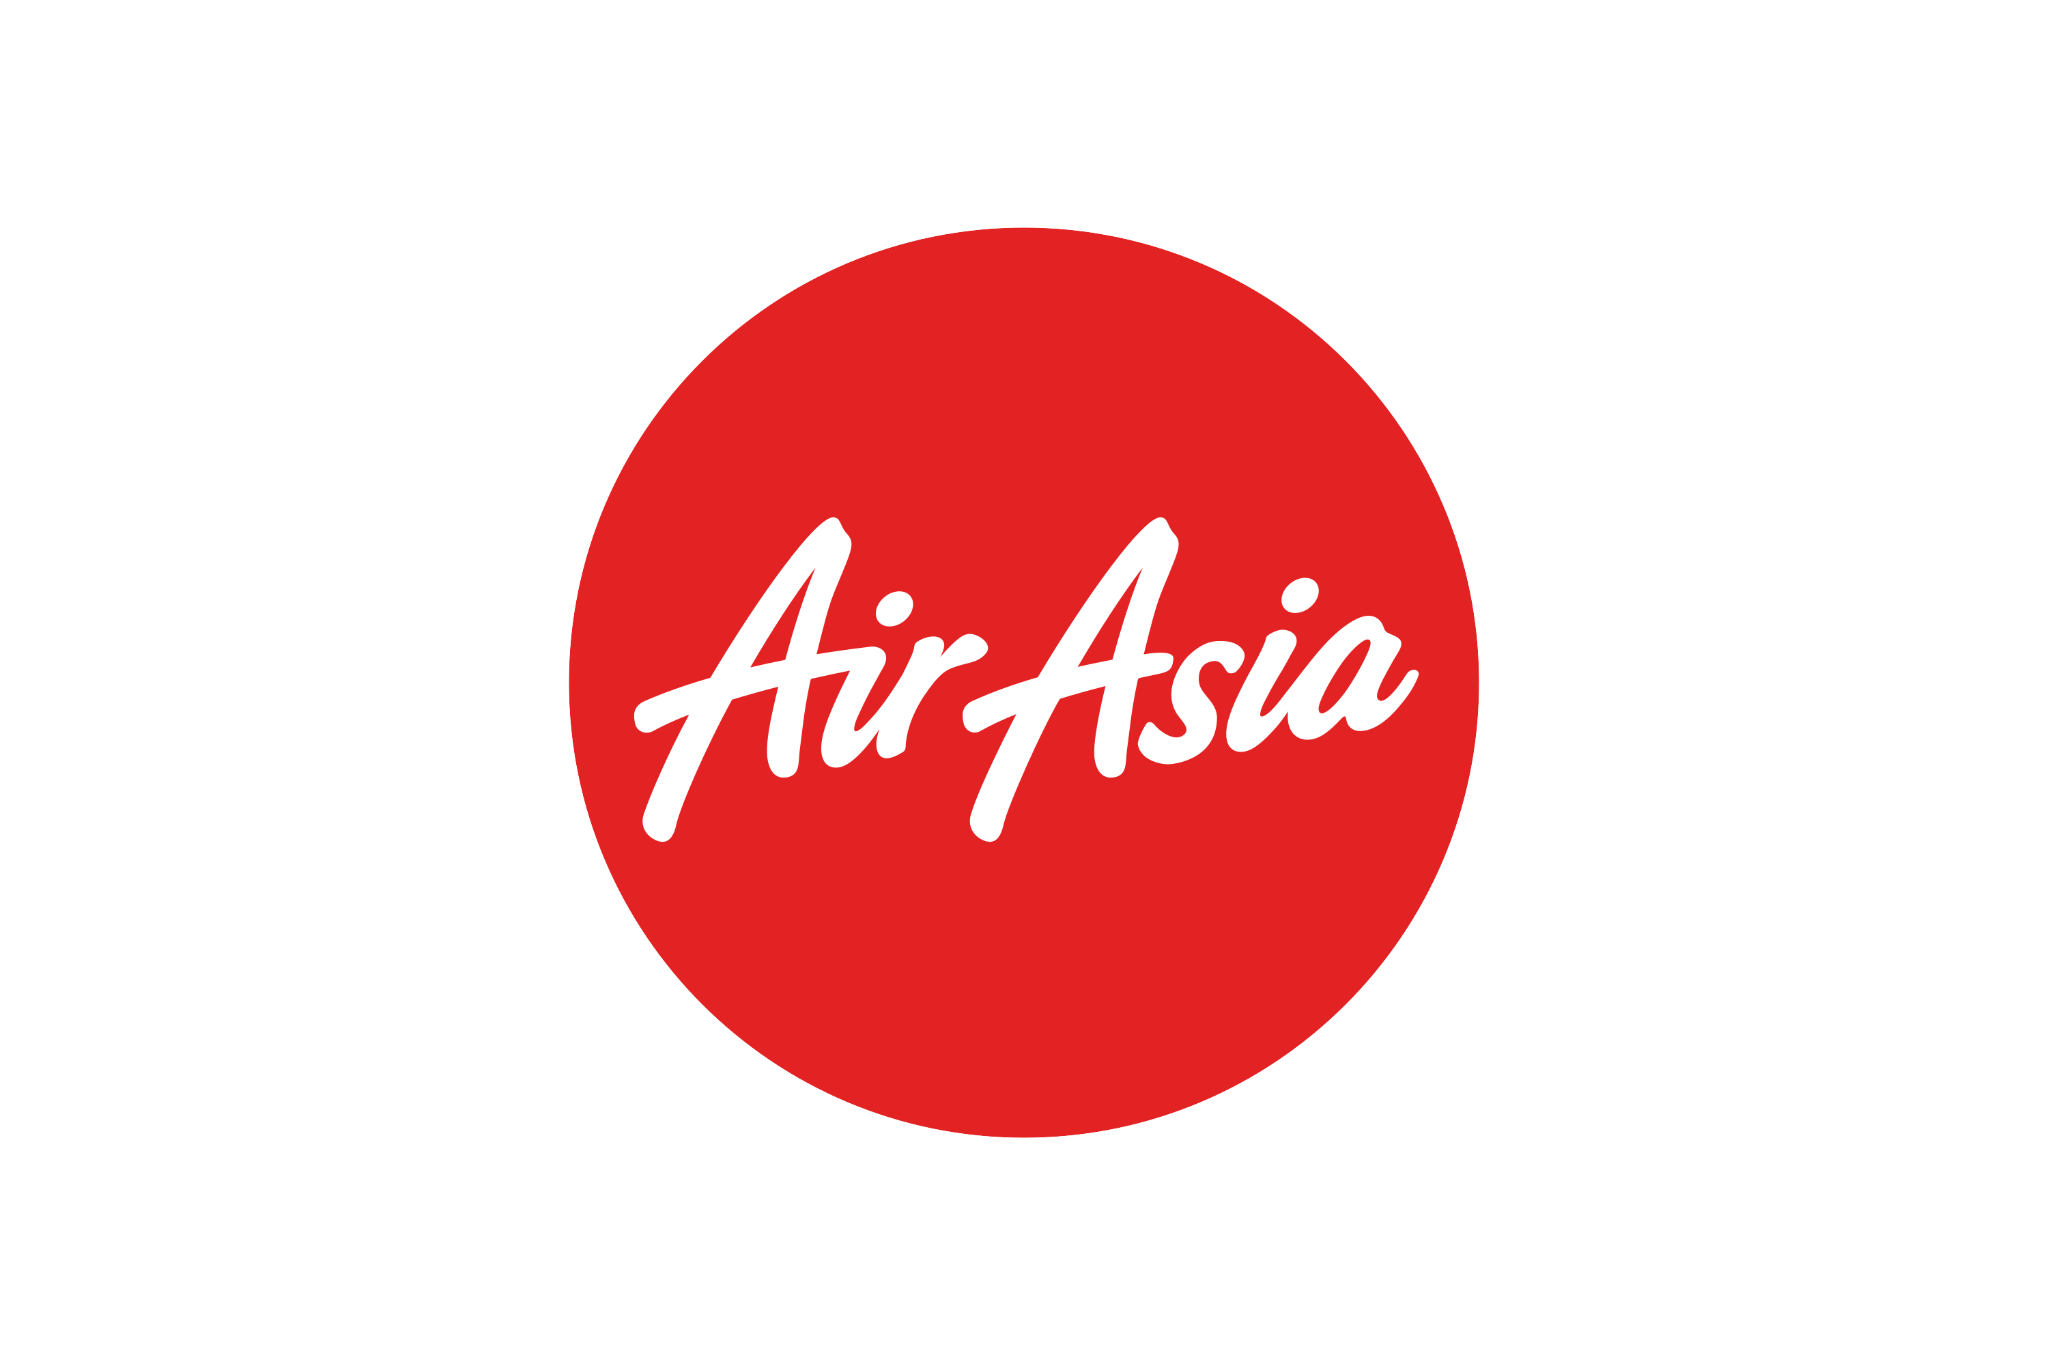 AirAsia India retains leadership position in On Time Performance (OTP) as per DGCA Report